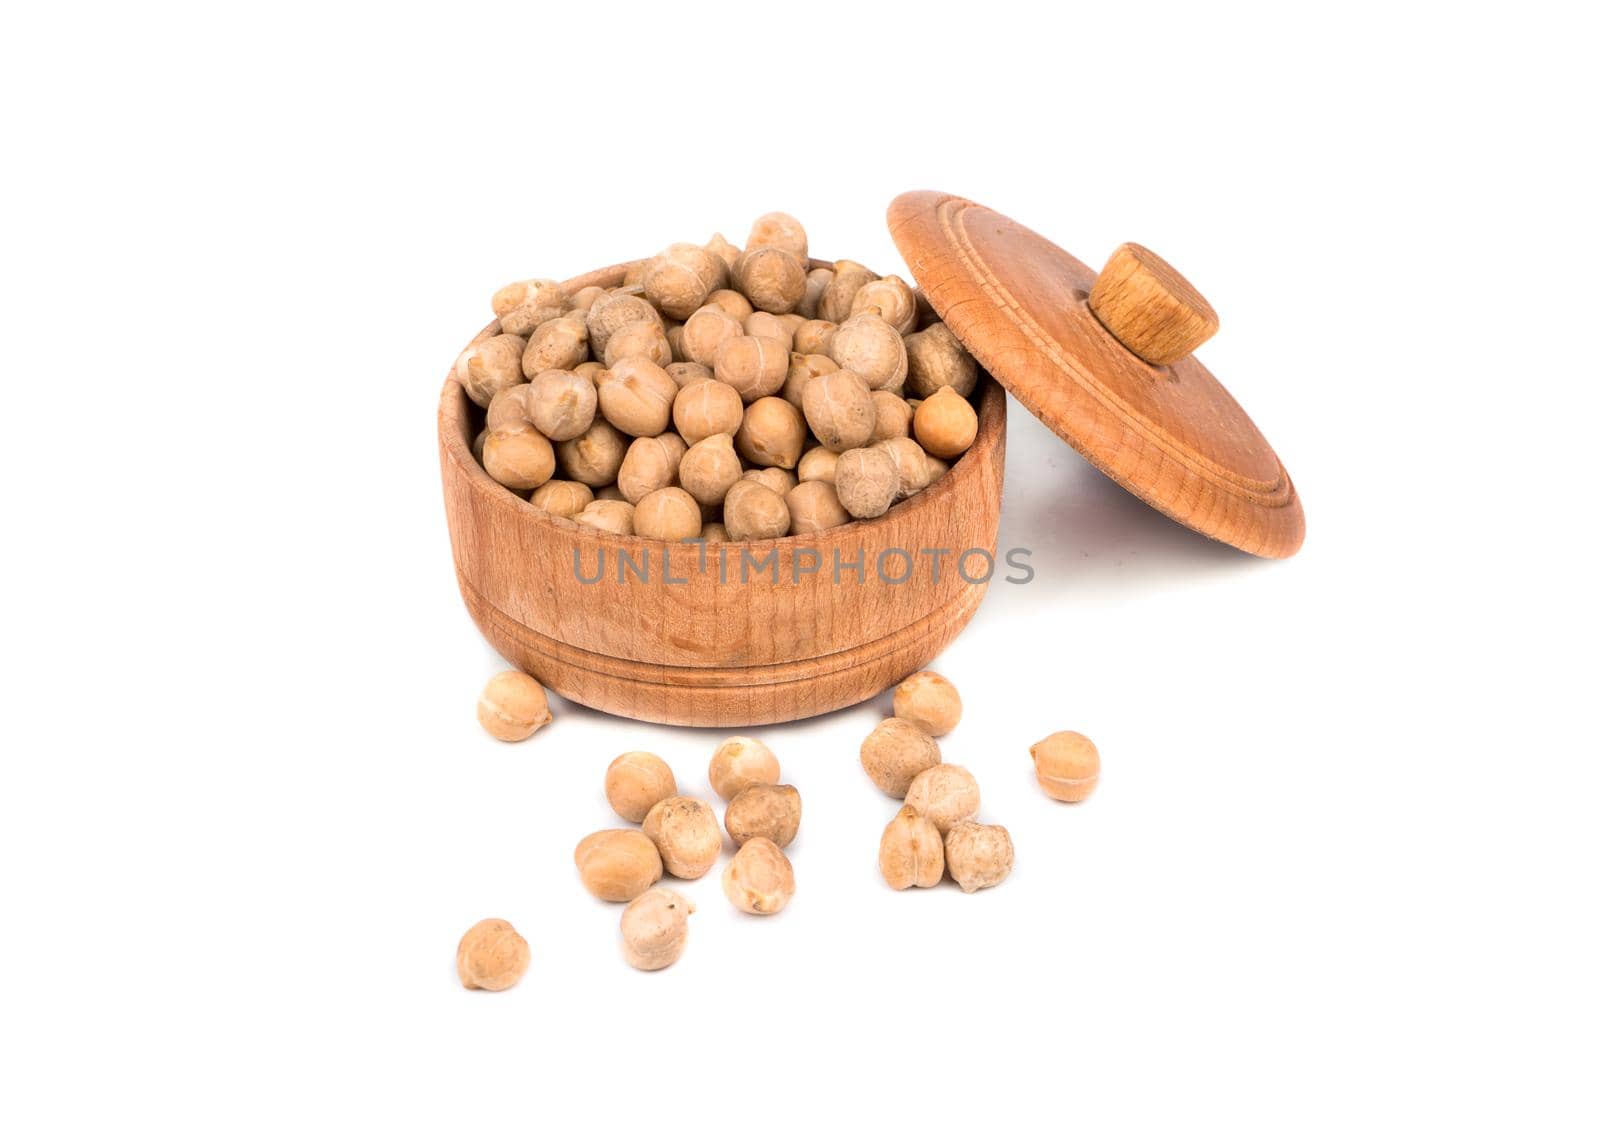 Dry chickpeas in a wooden bowl on white background